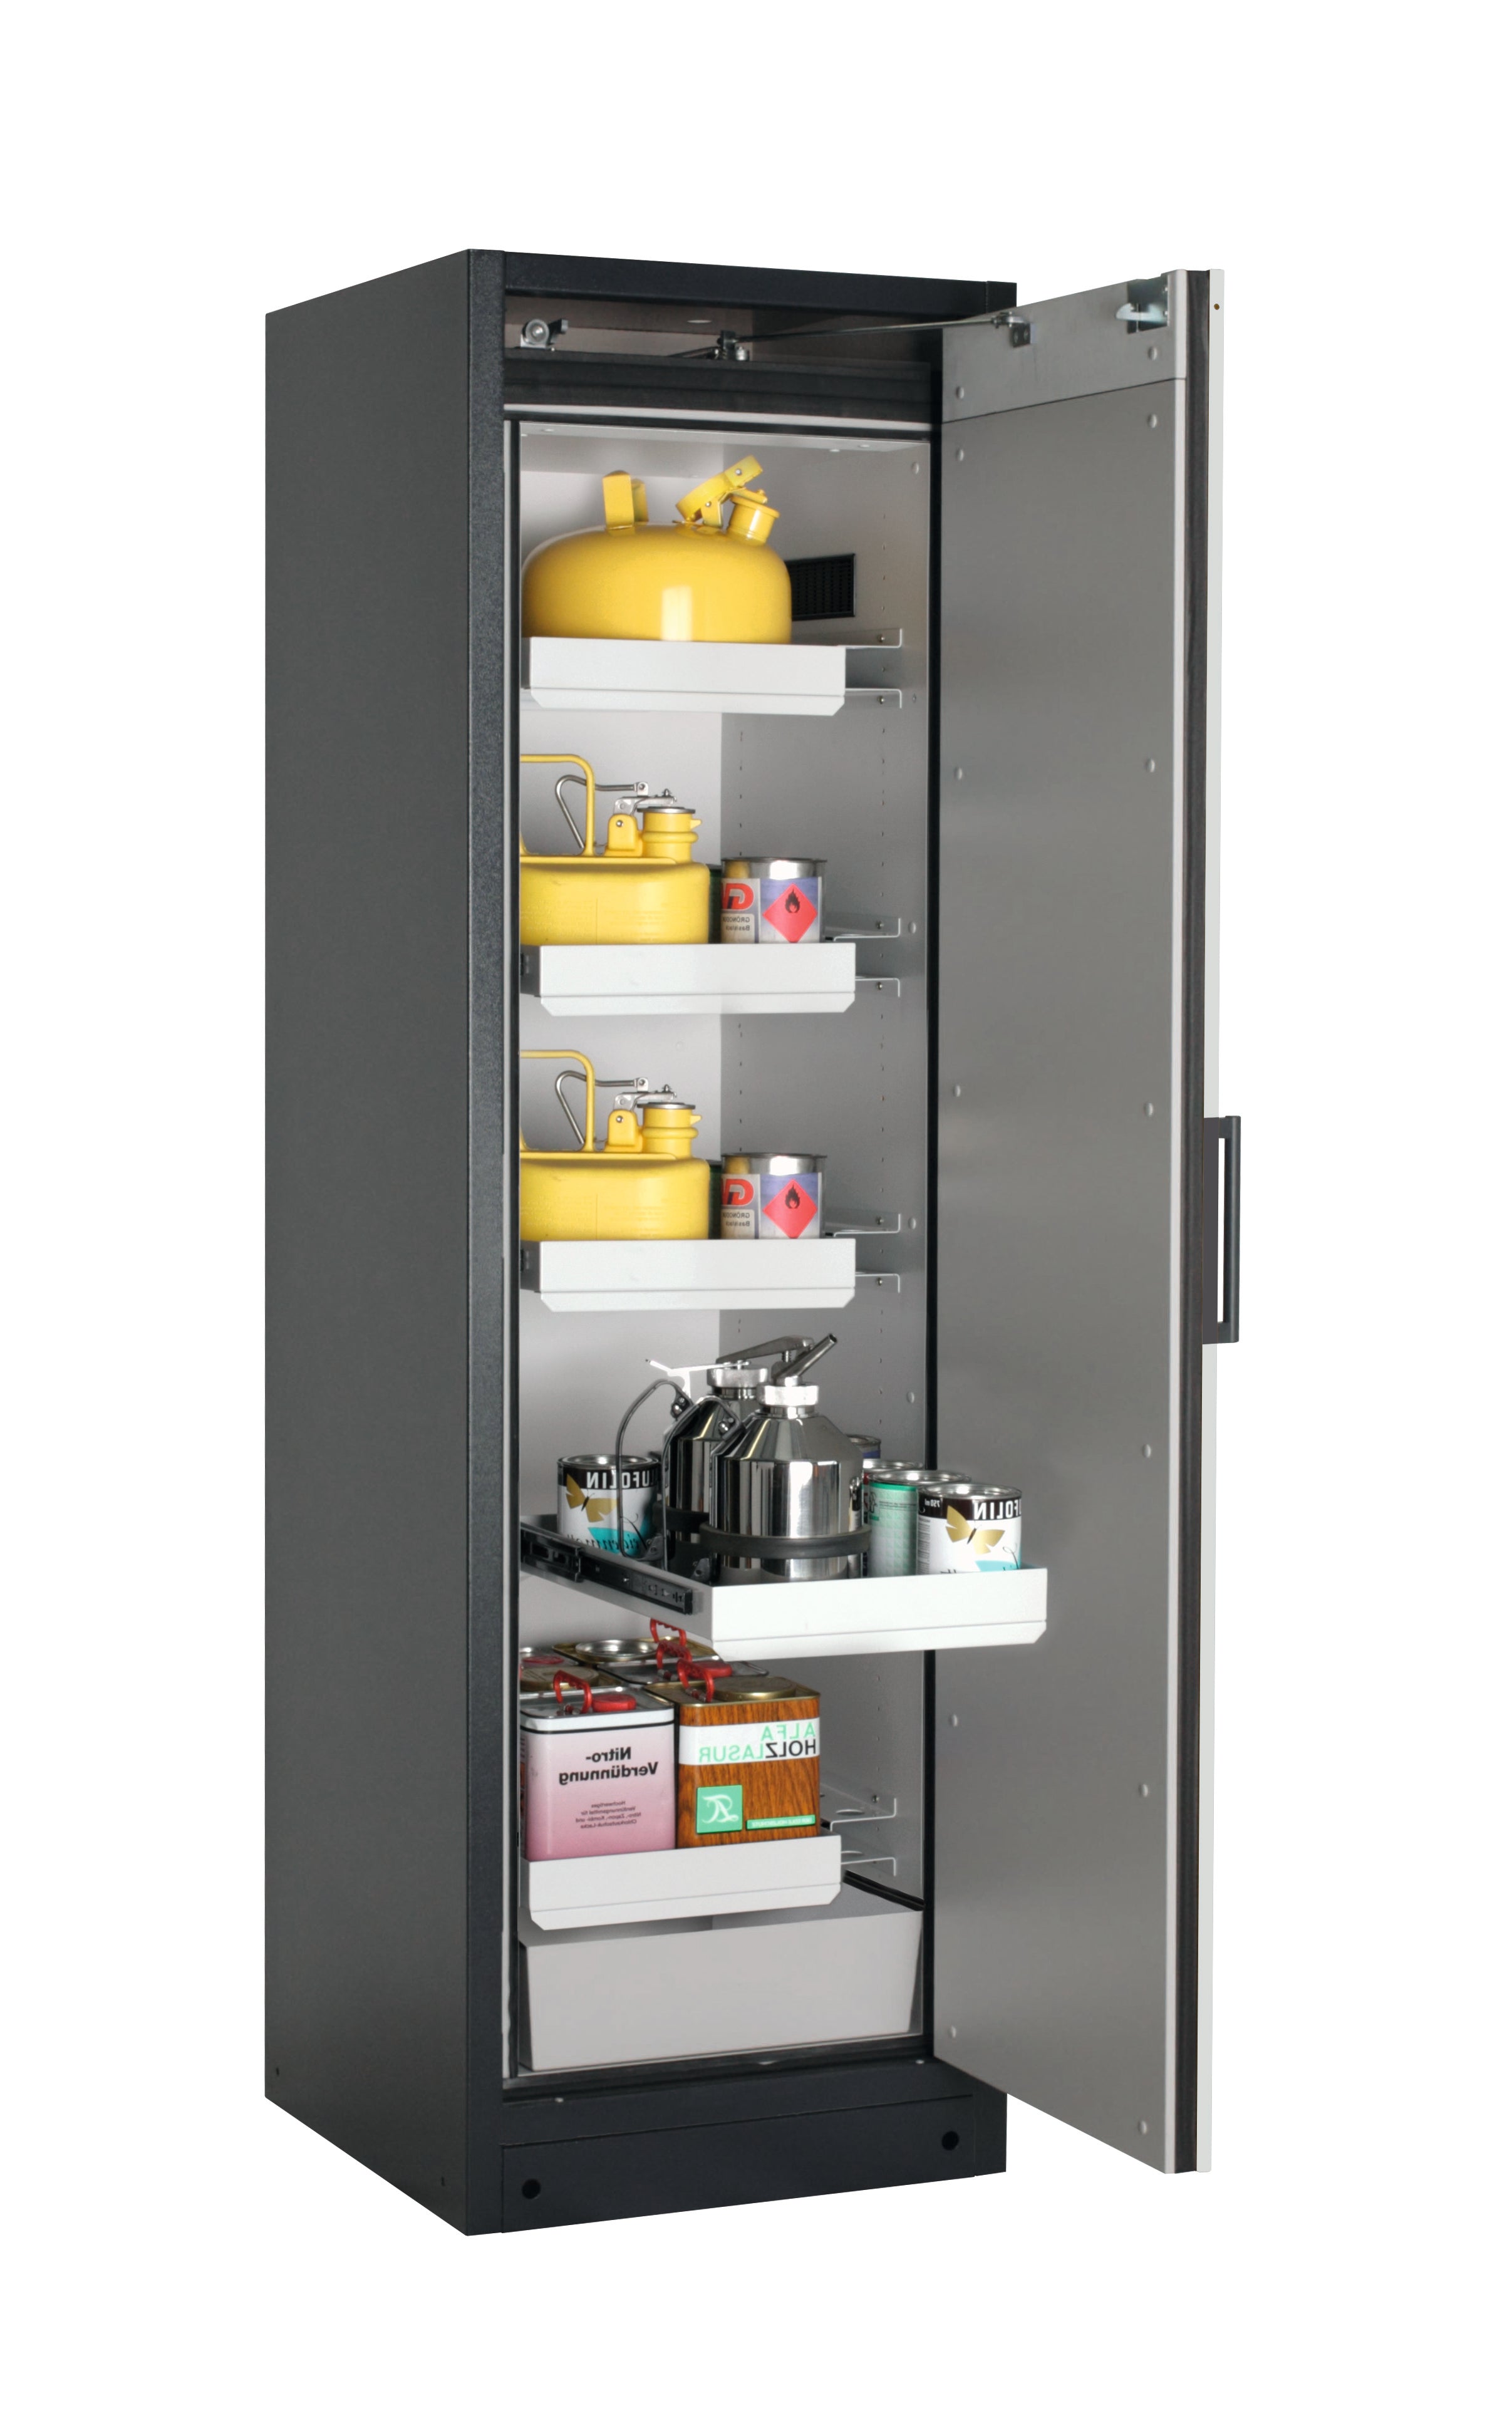 Type 90 safety storage cabinet Q-PEGASUS-90 model Q90.195.060.WDACR in light grey RAL 7035 with 4x drawer (standard) (sheet steel),